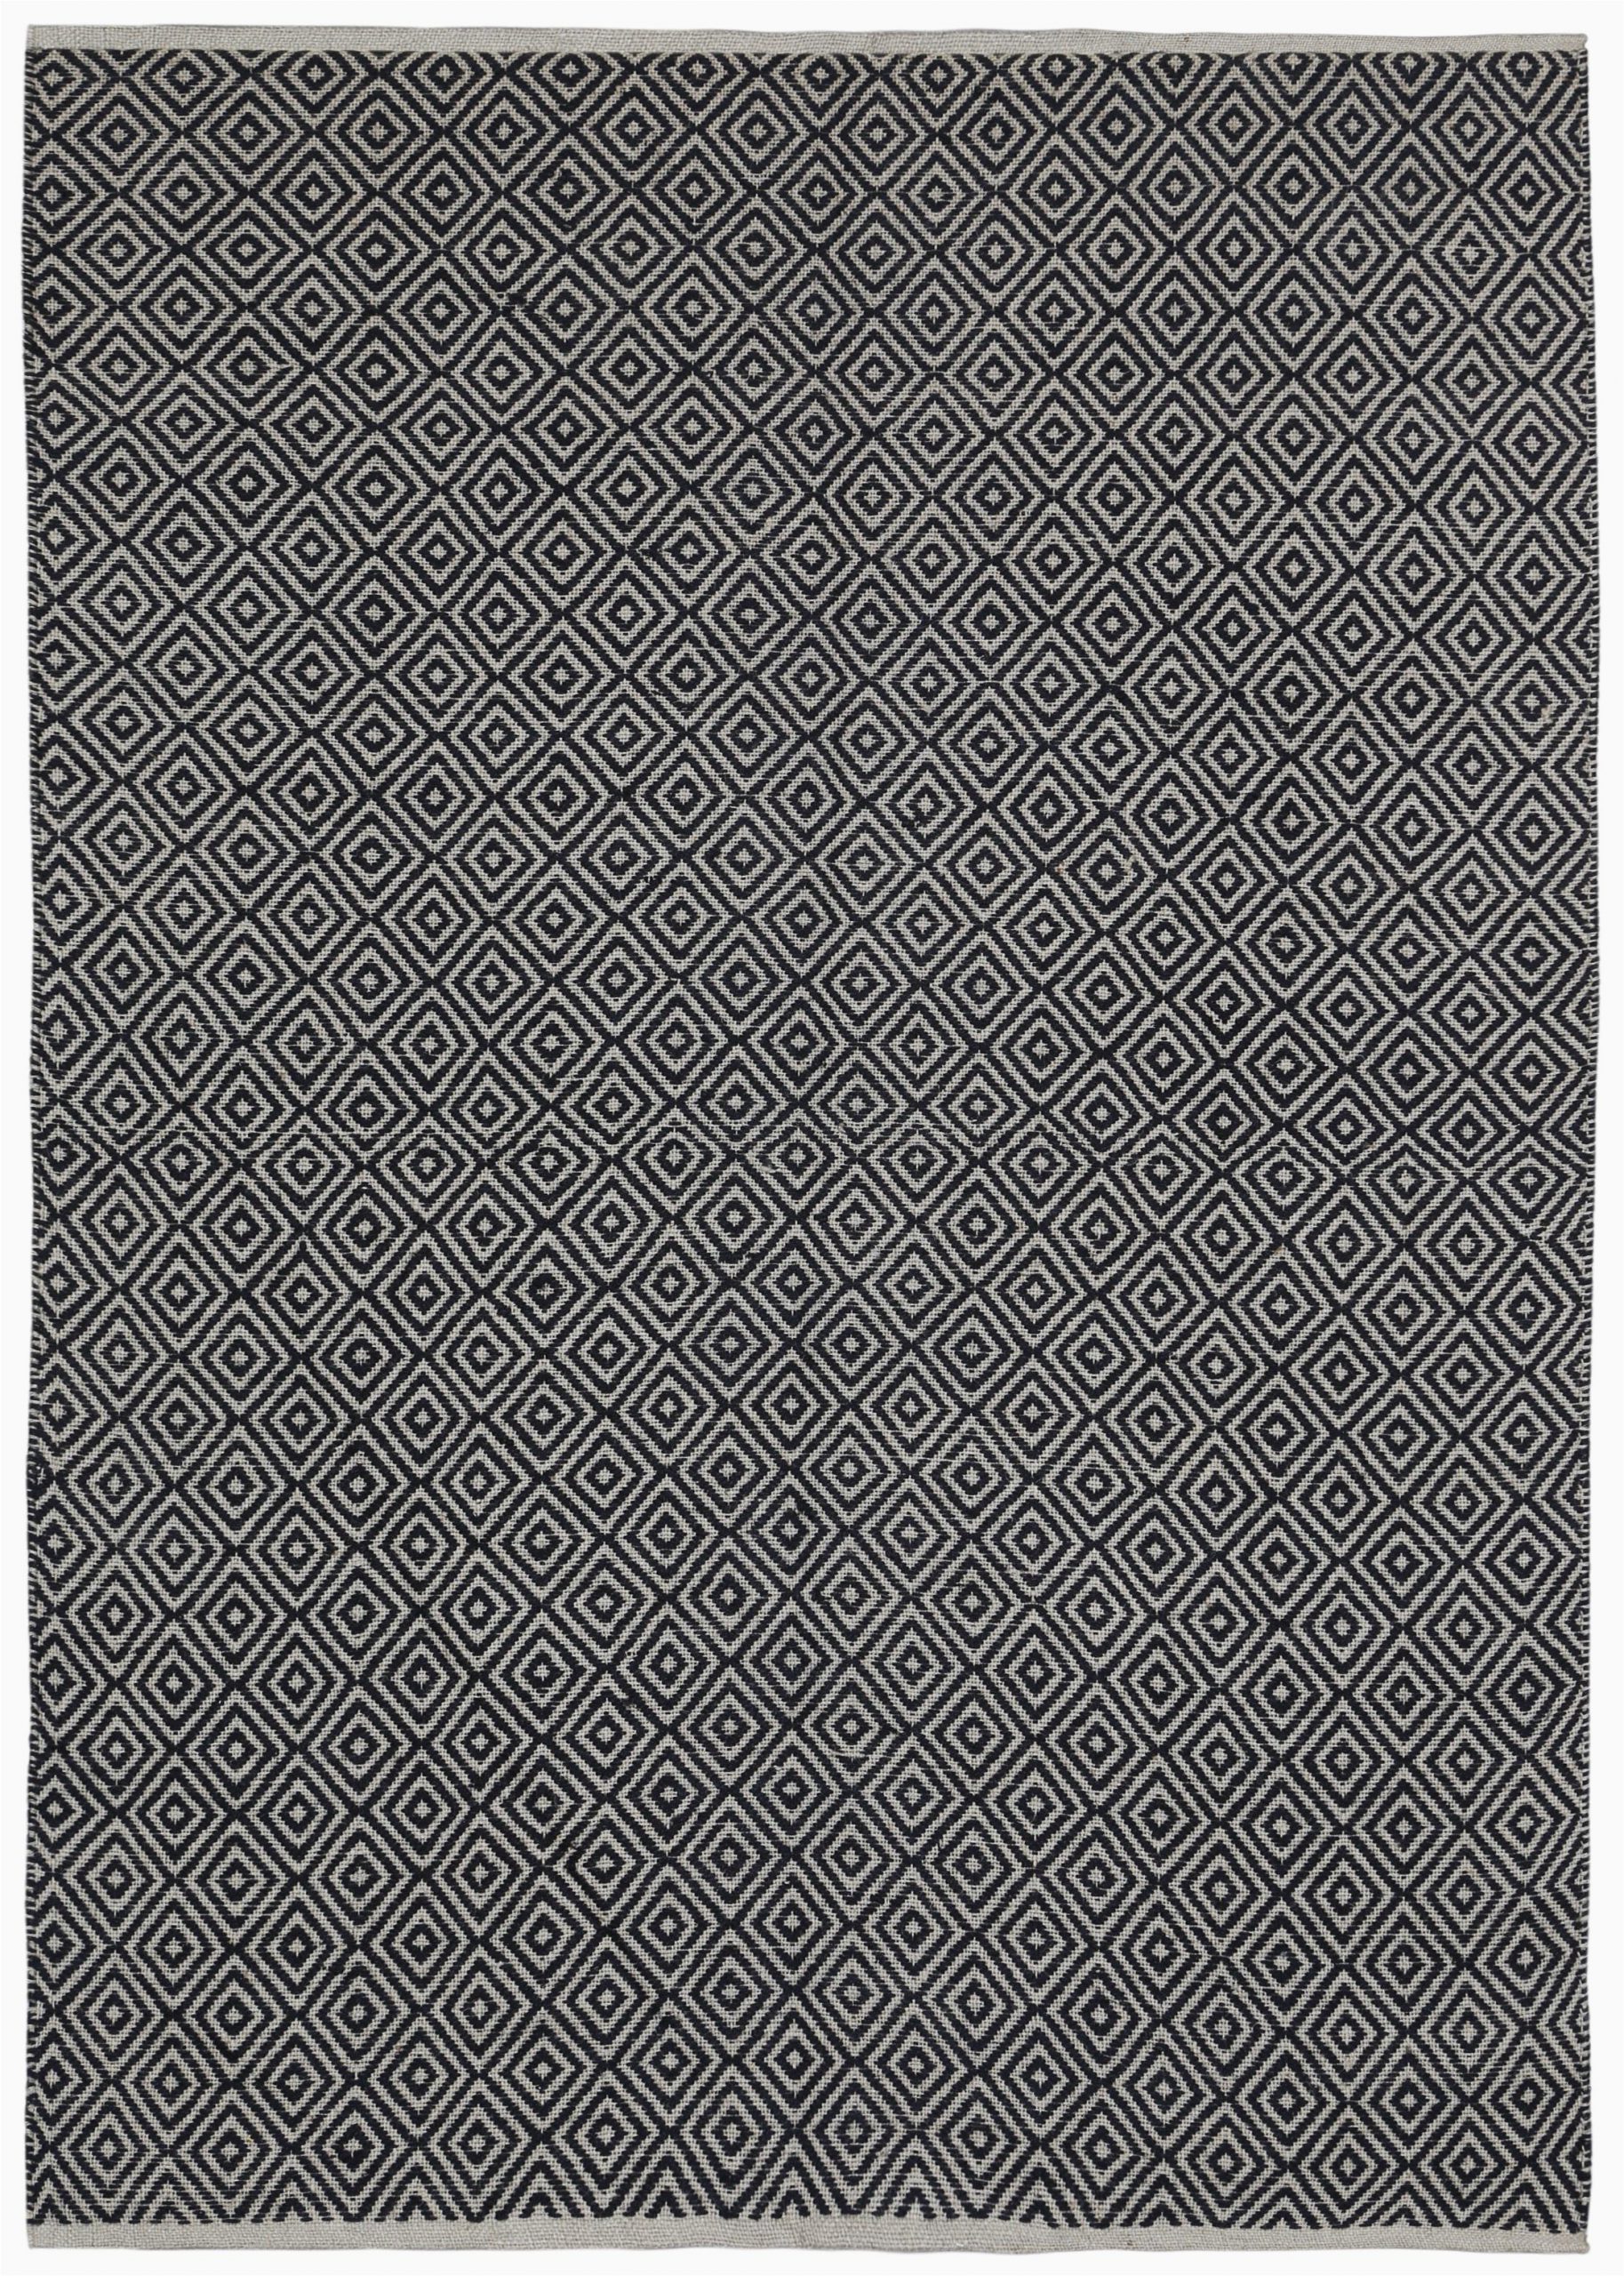 Black and White Woven area Rug Synthia Hand Woven Black area Rug